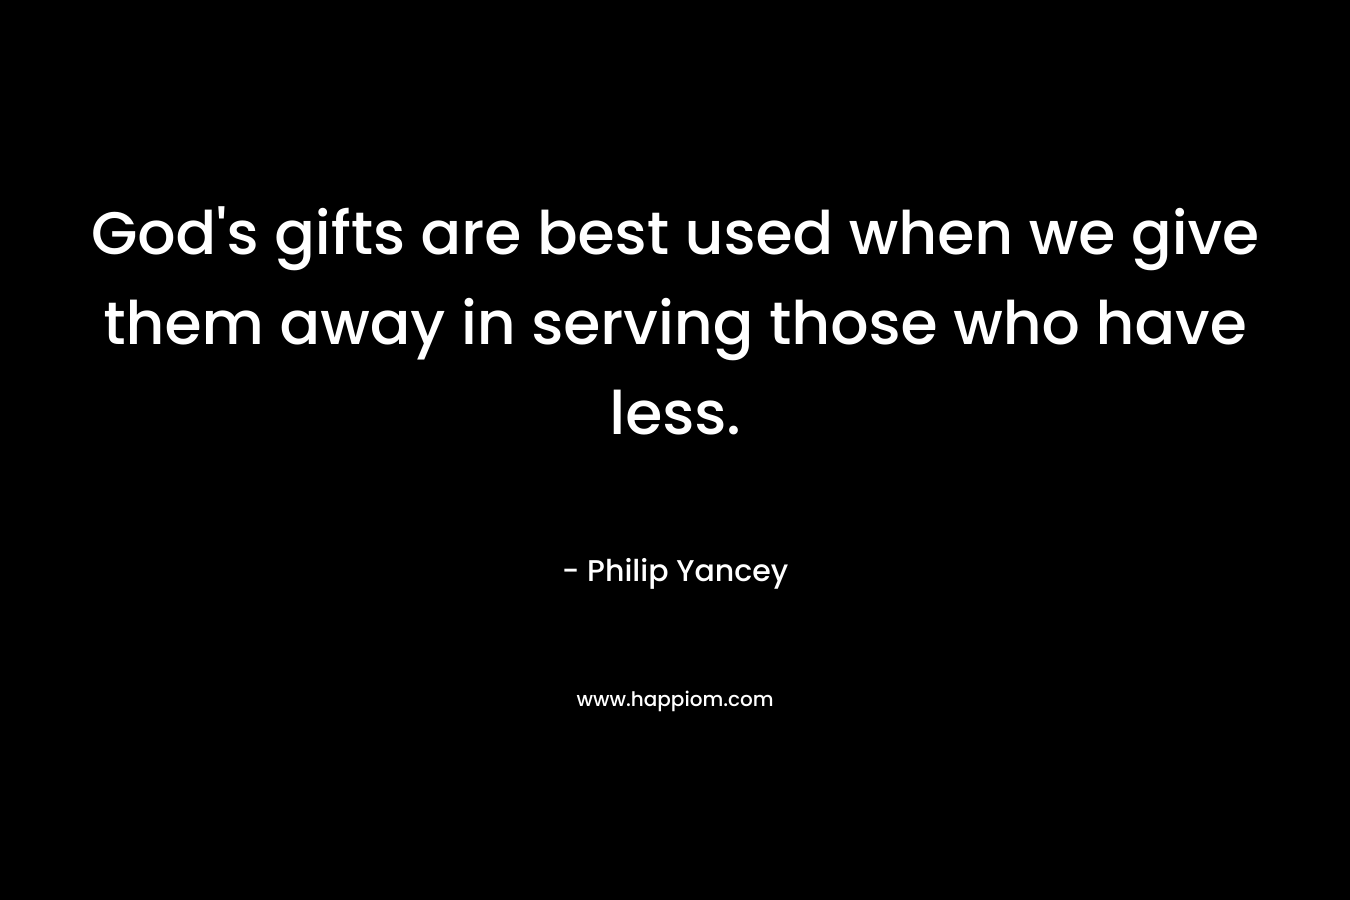 God’s gifts are best used when we give them away in serving those who have less. – Philip Yancey